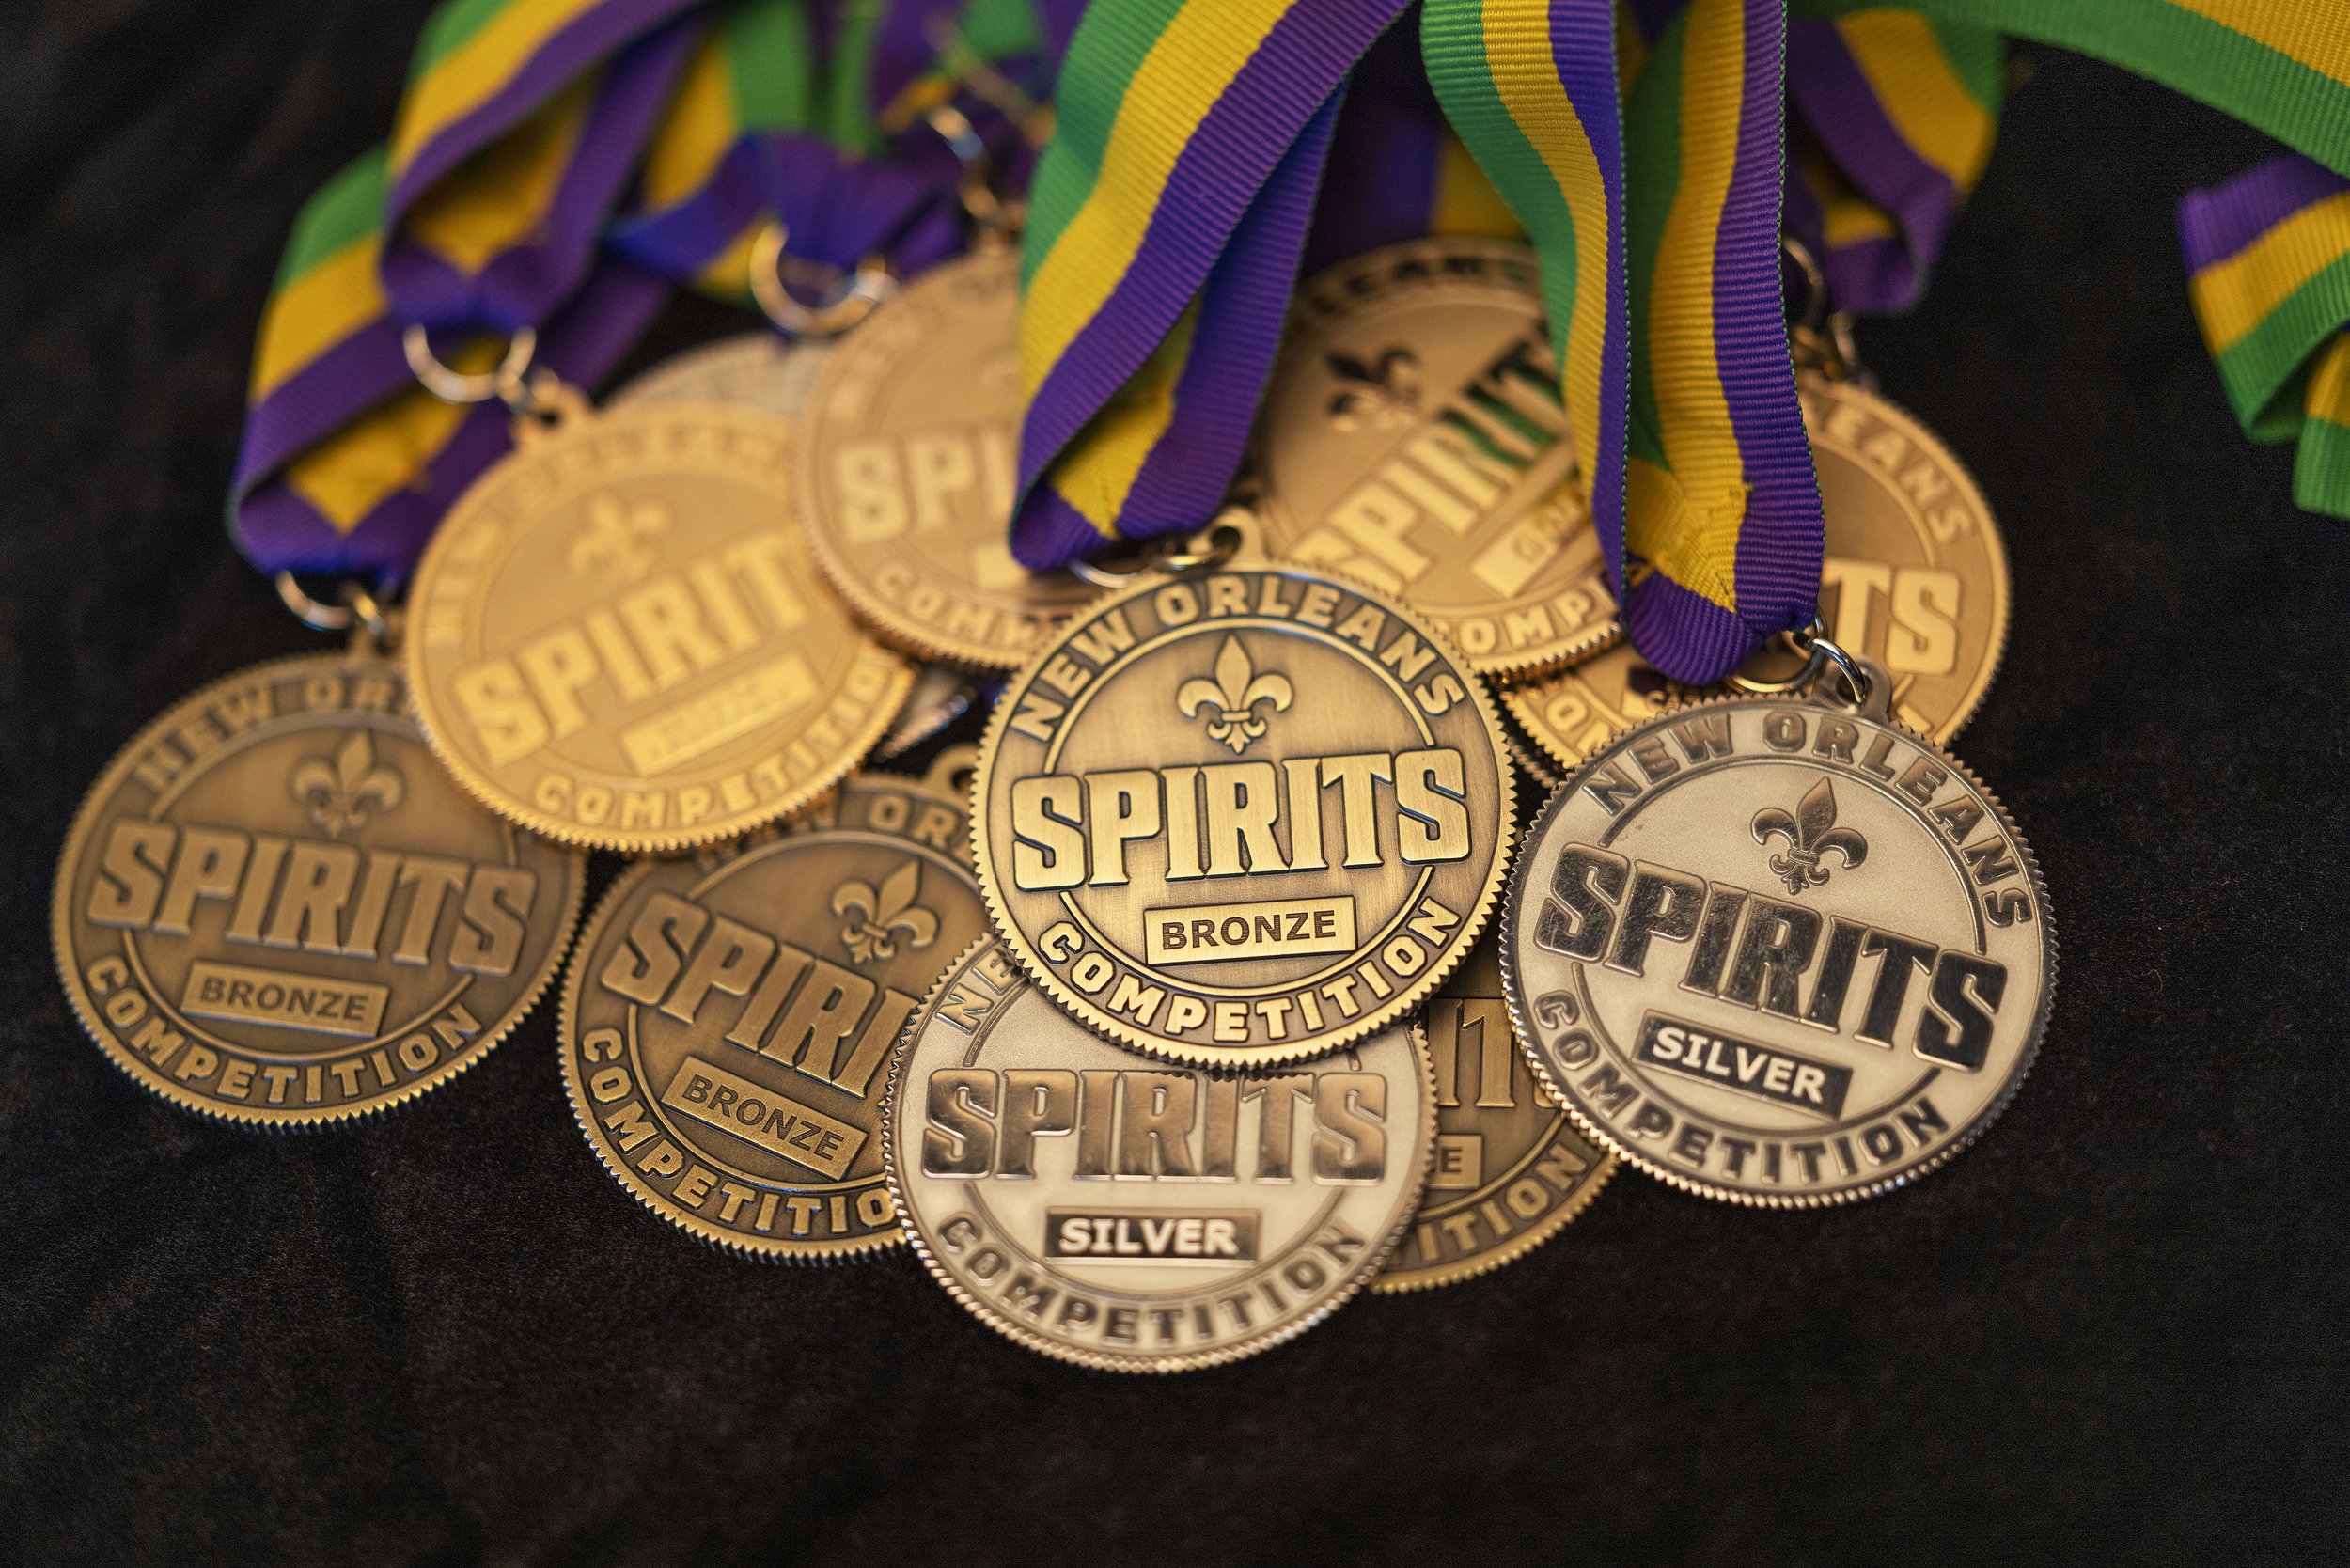 NEW ORLEANS SPIRITS COMPETITION